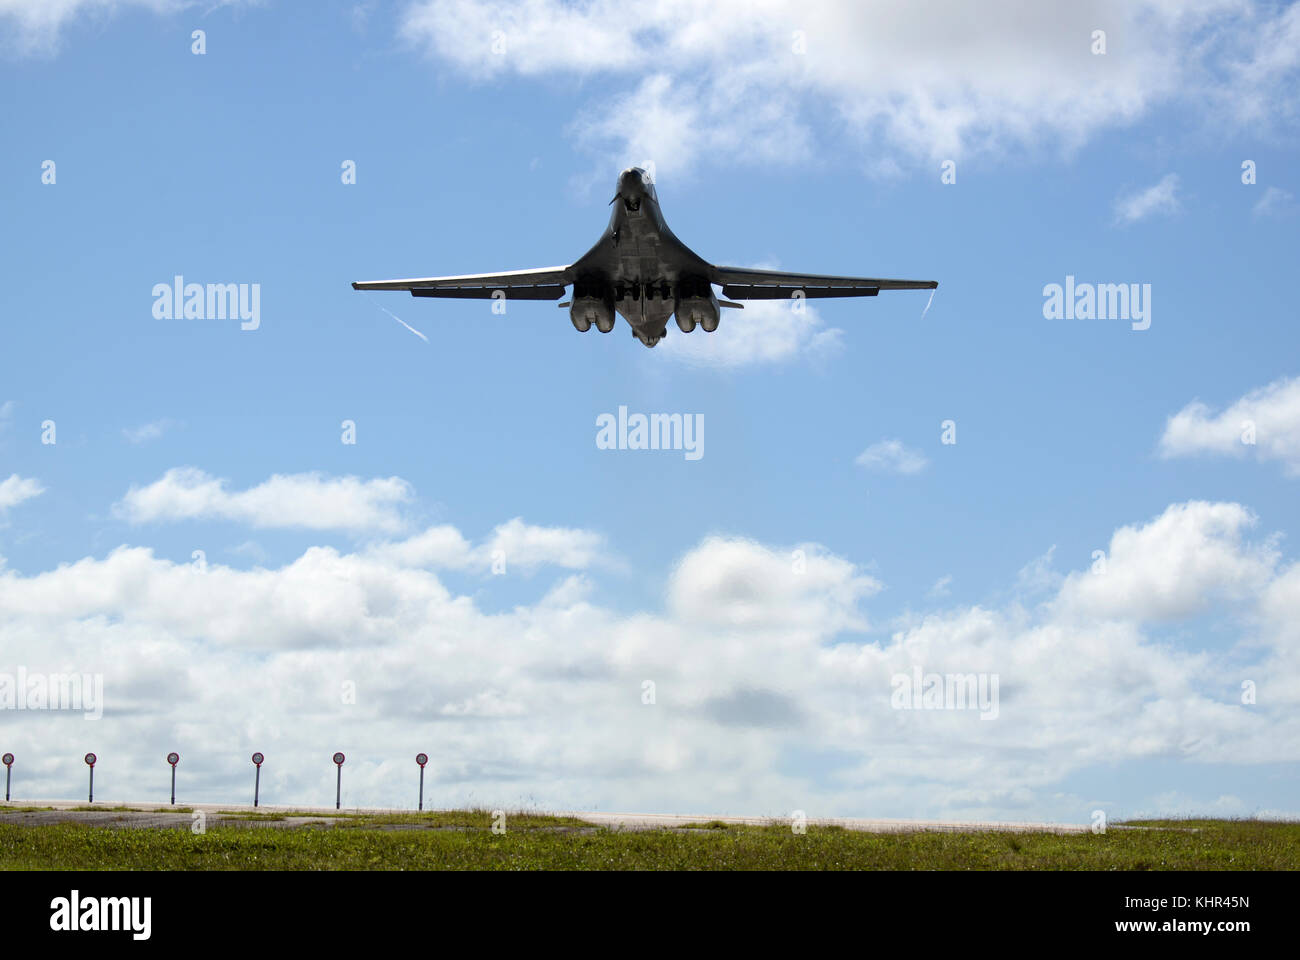 A U.S. Air Force B-1B Lancer strategic bomber aircraft takes off from the Anderson Air Force Base November 13, 2017 in Yigo, Guam.  (photo by Gerald R. Willis via Planetpix) Stock Photo